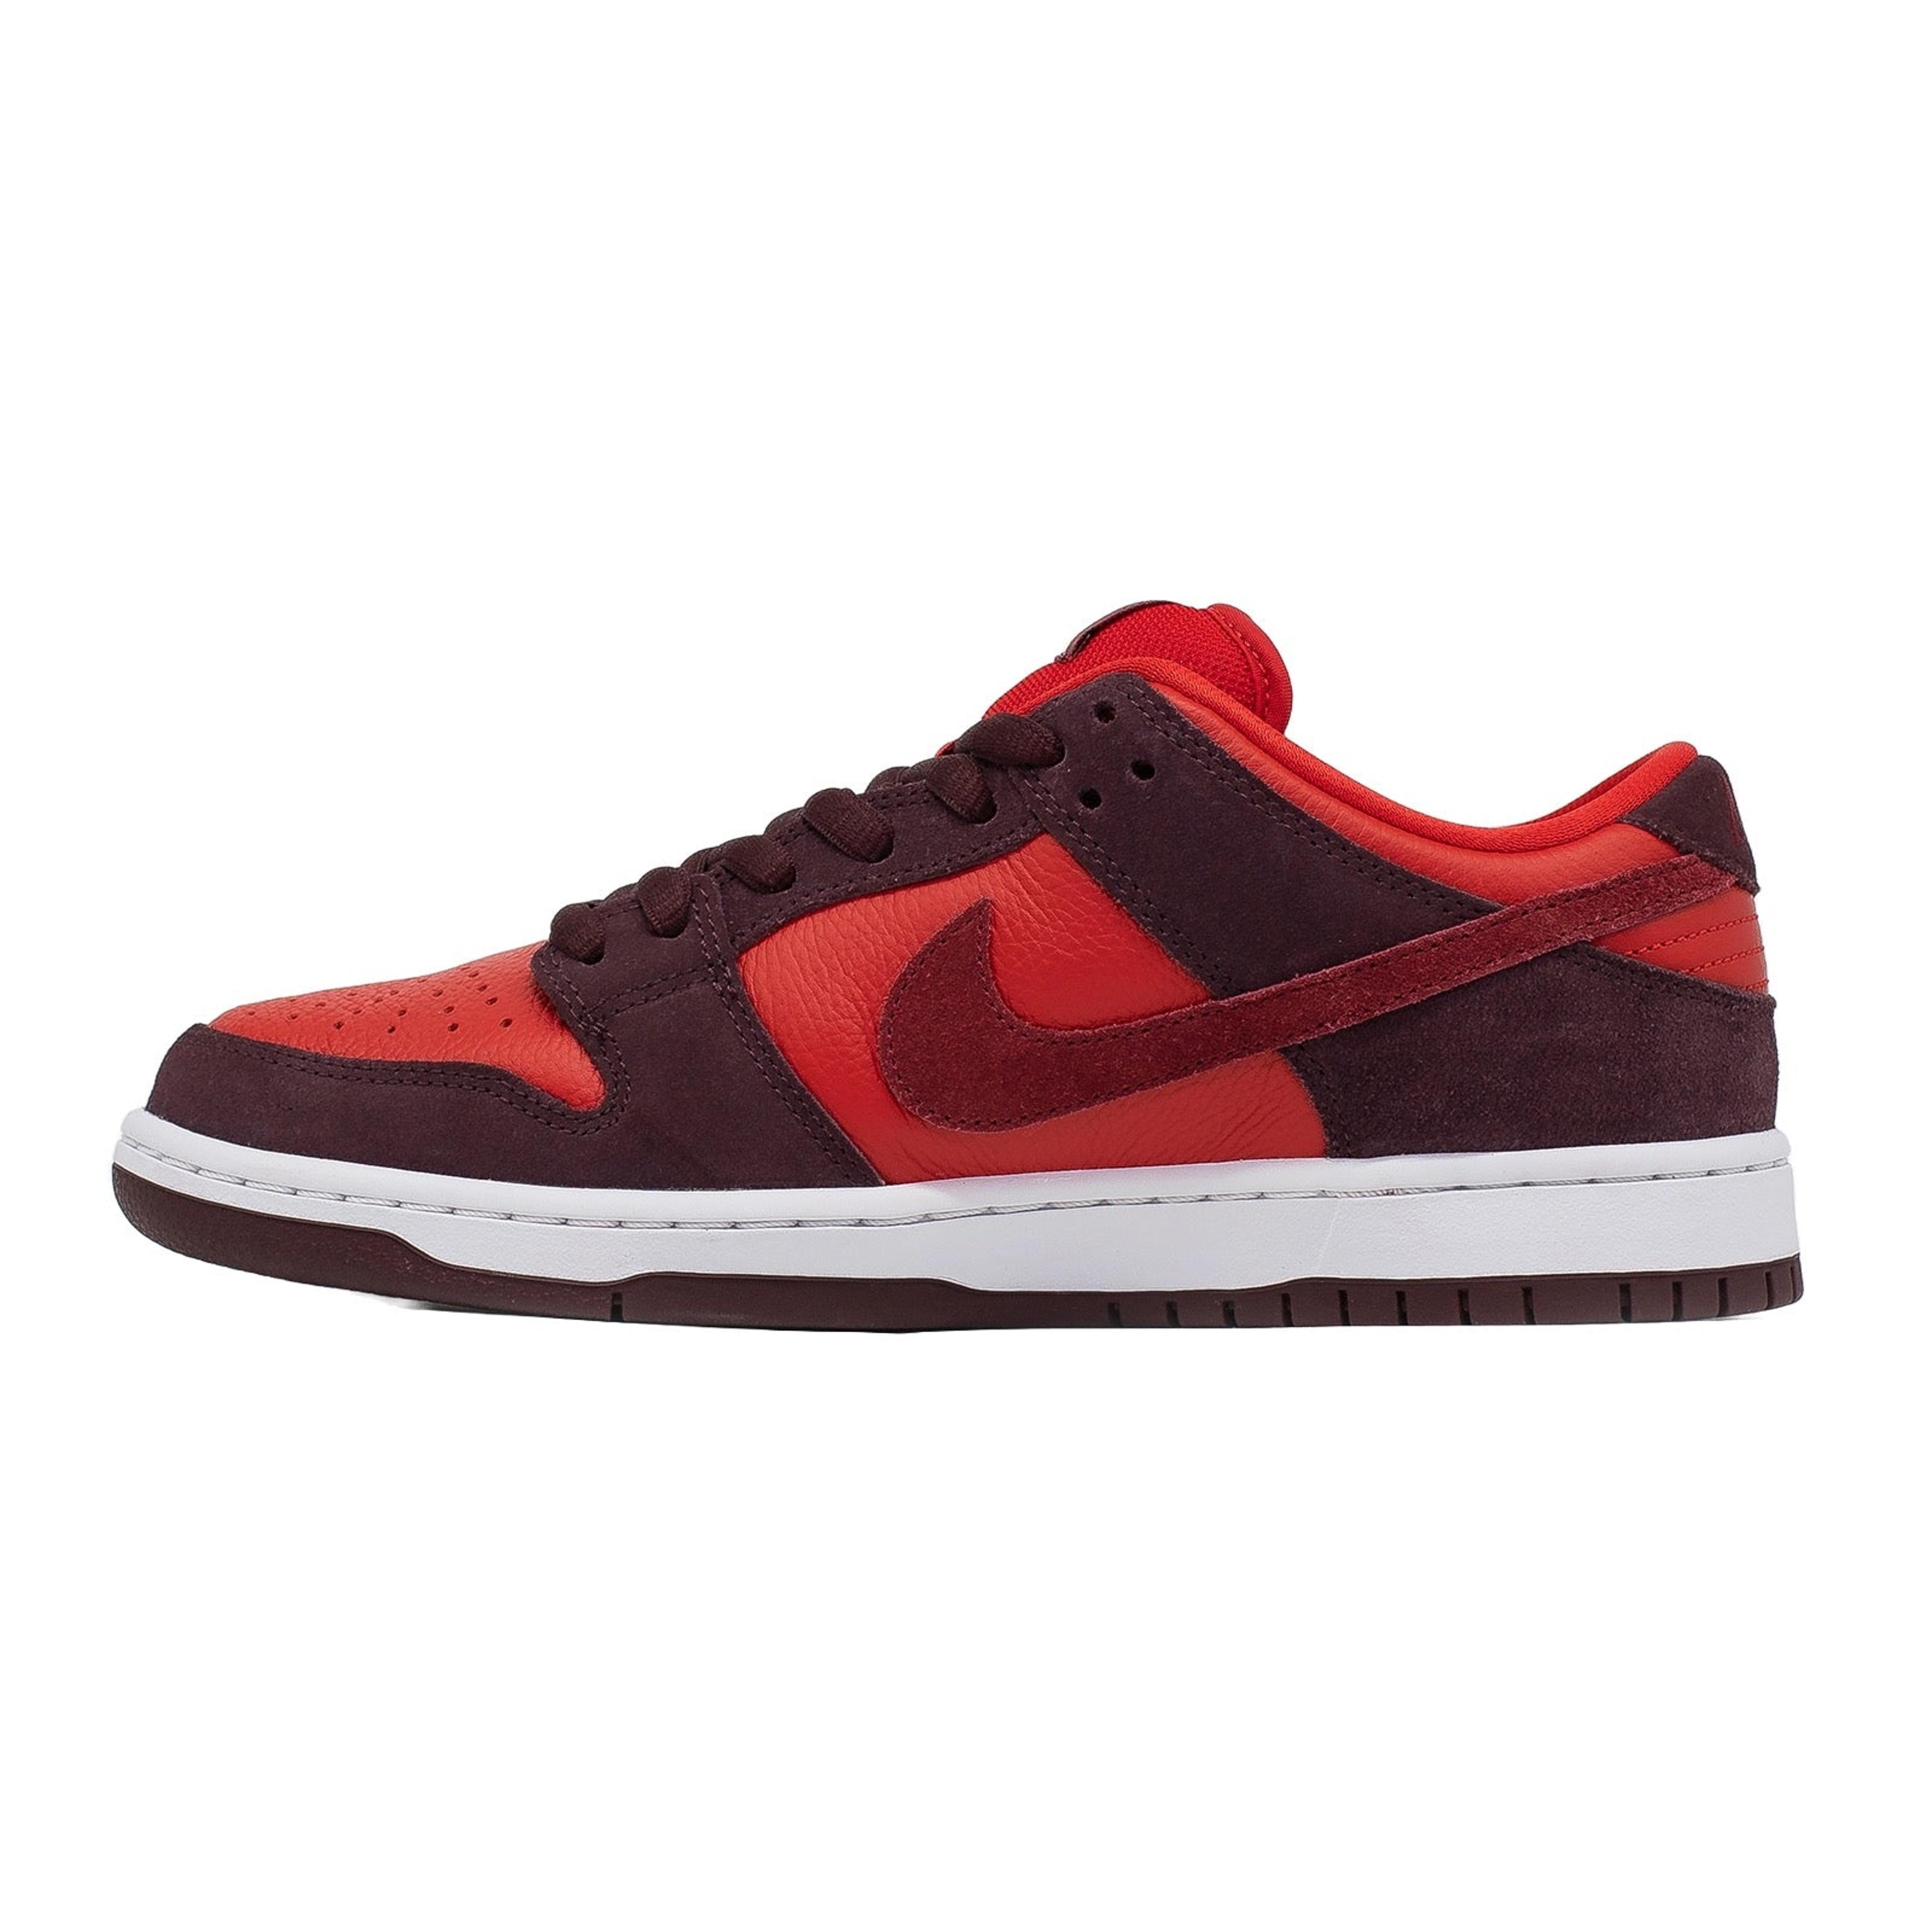 Alternate View 1 of Nike SB Dunk Low, Fruity Pack - Cherry